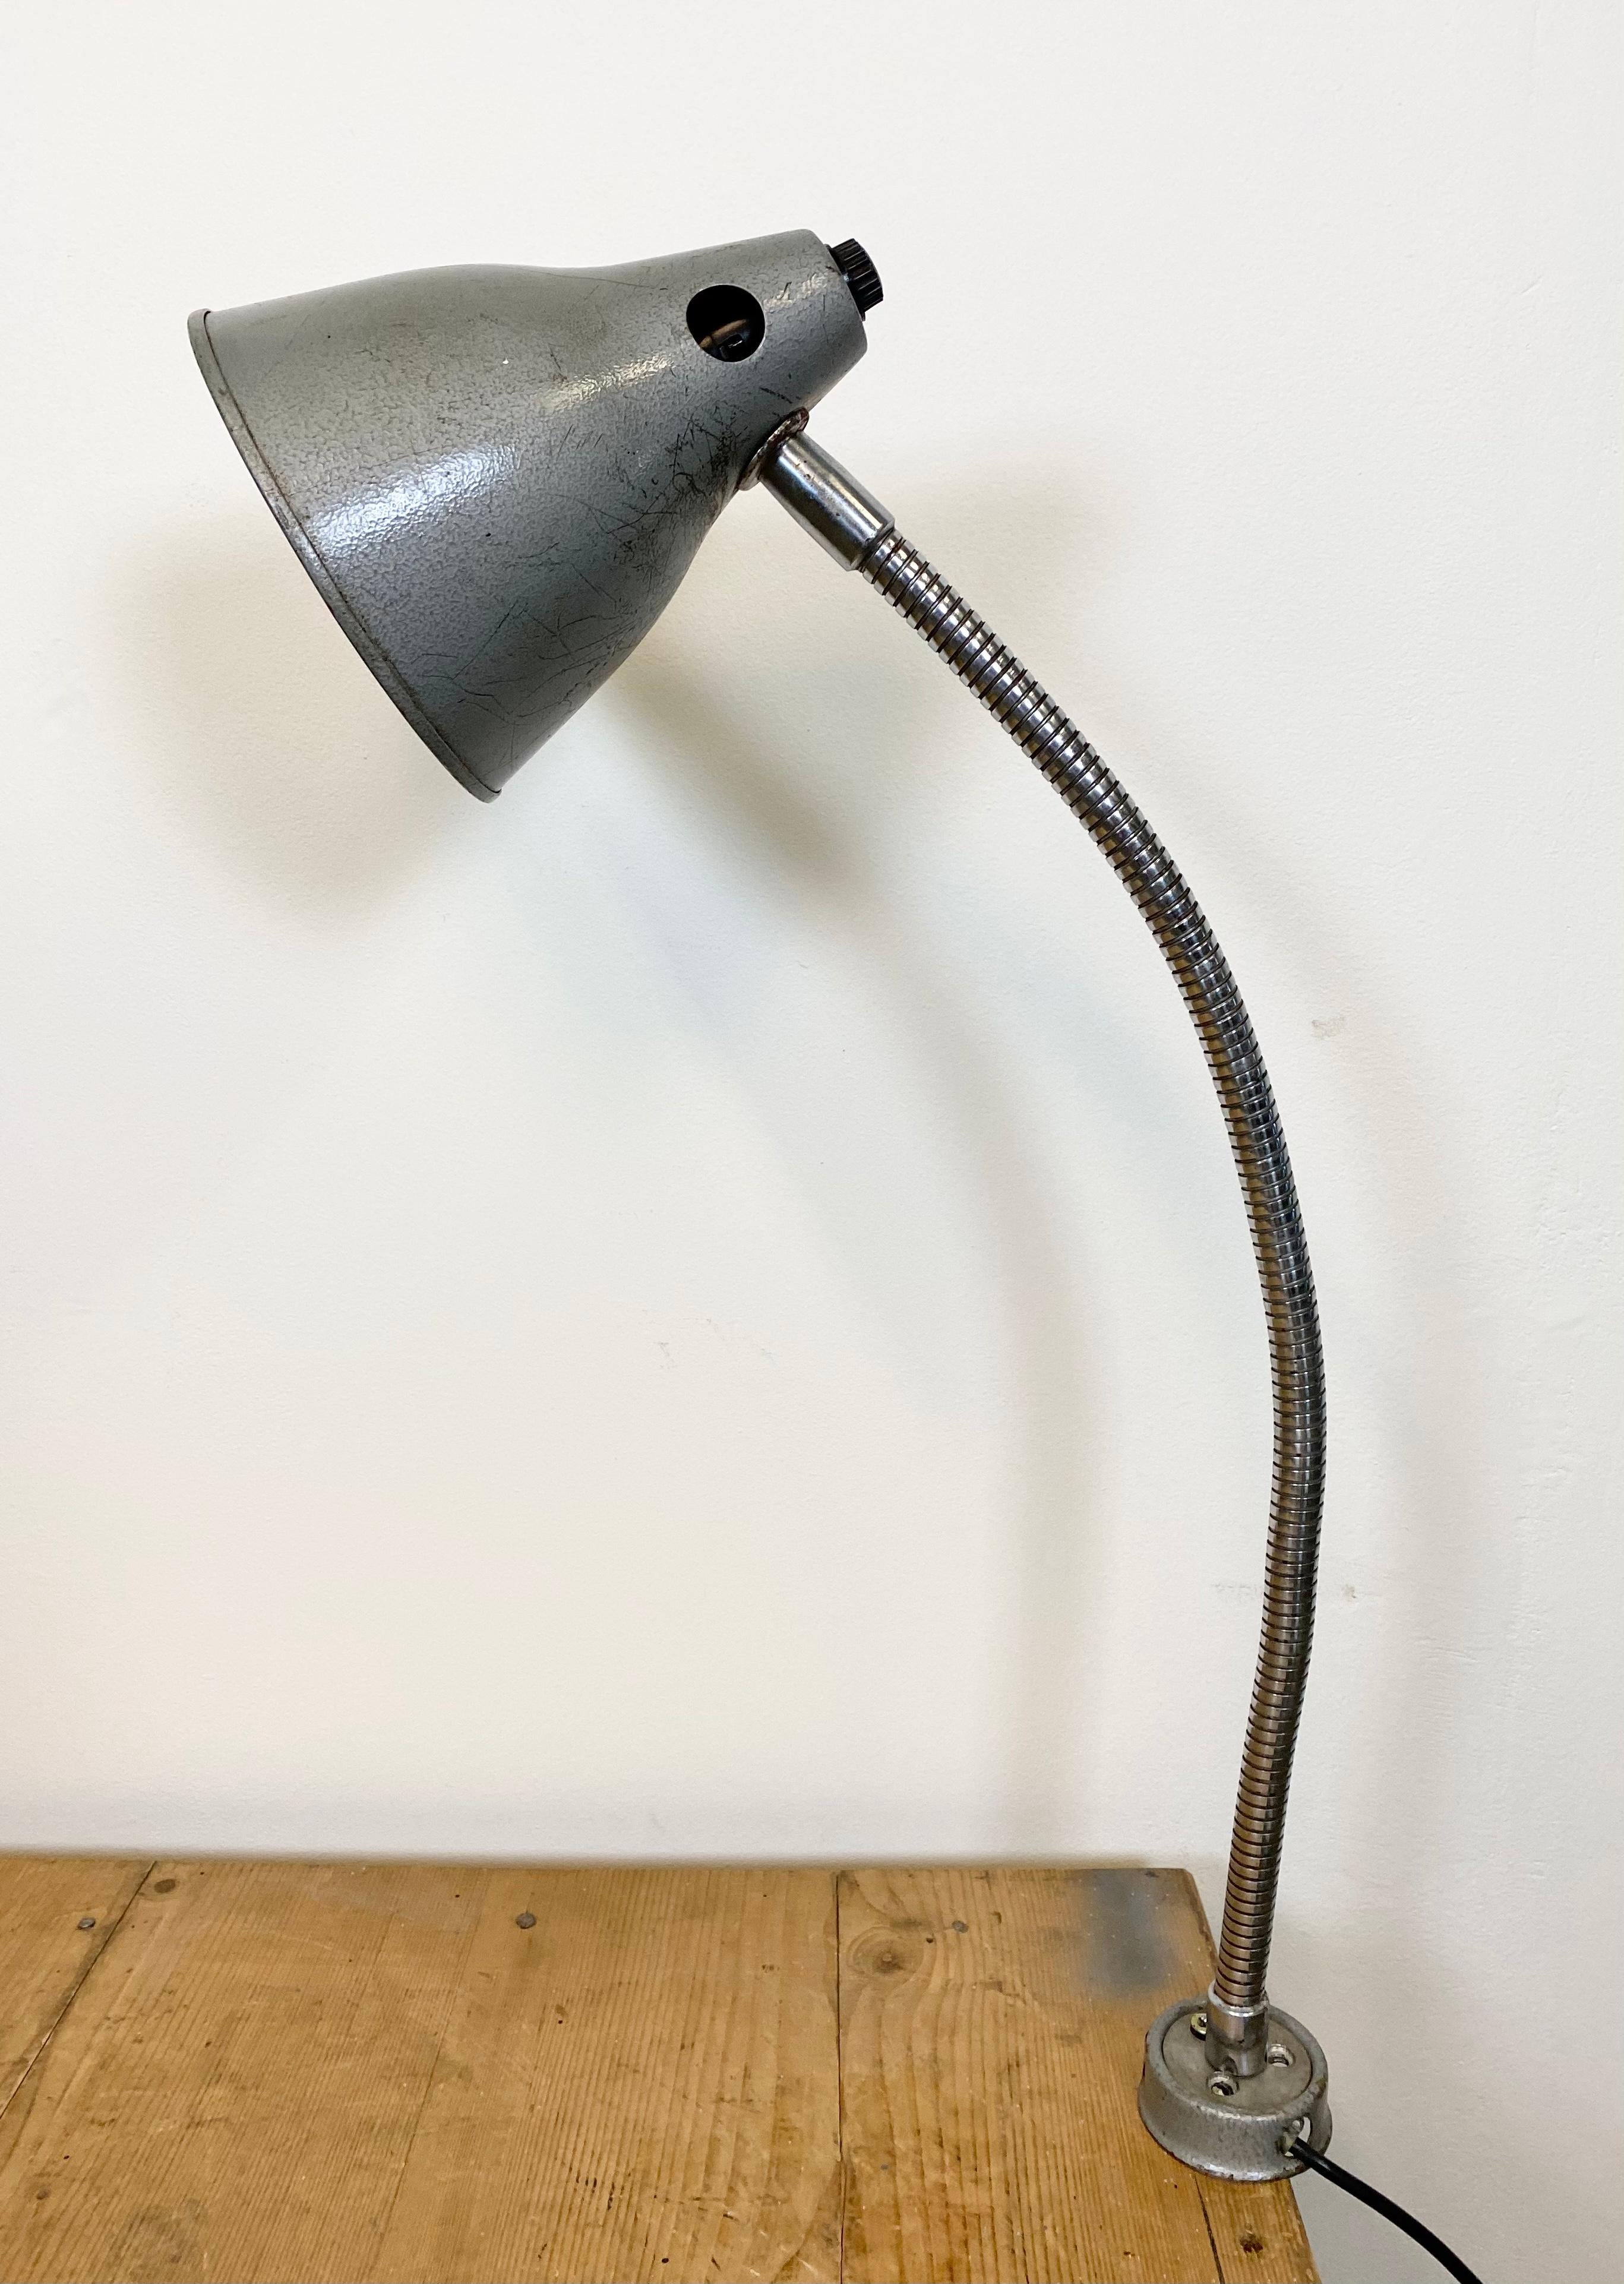 This gooseneck desk lamp was designed and manufactured in Russia during the 1960s. It features a grey hammerpaint shade, a chrome-plated flexible arm and metal base. The switch is situated inside the shade.
Original bakelite socket requires E 27